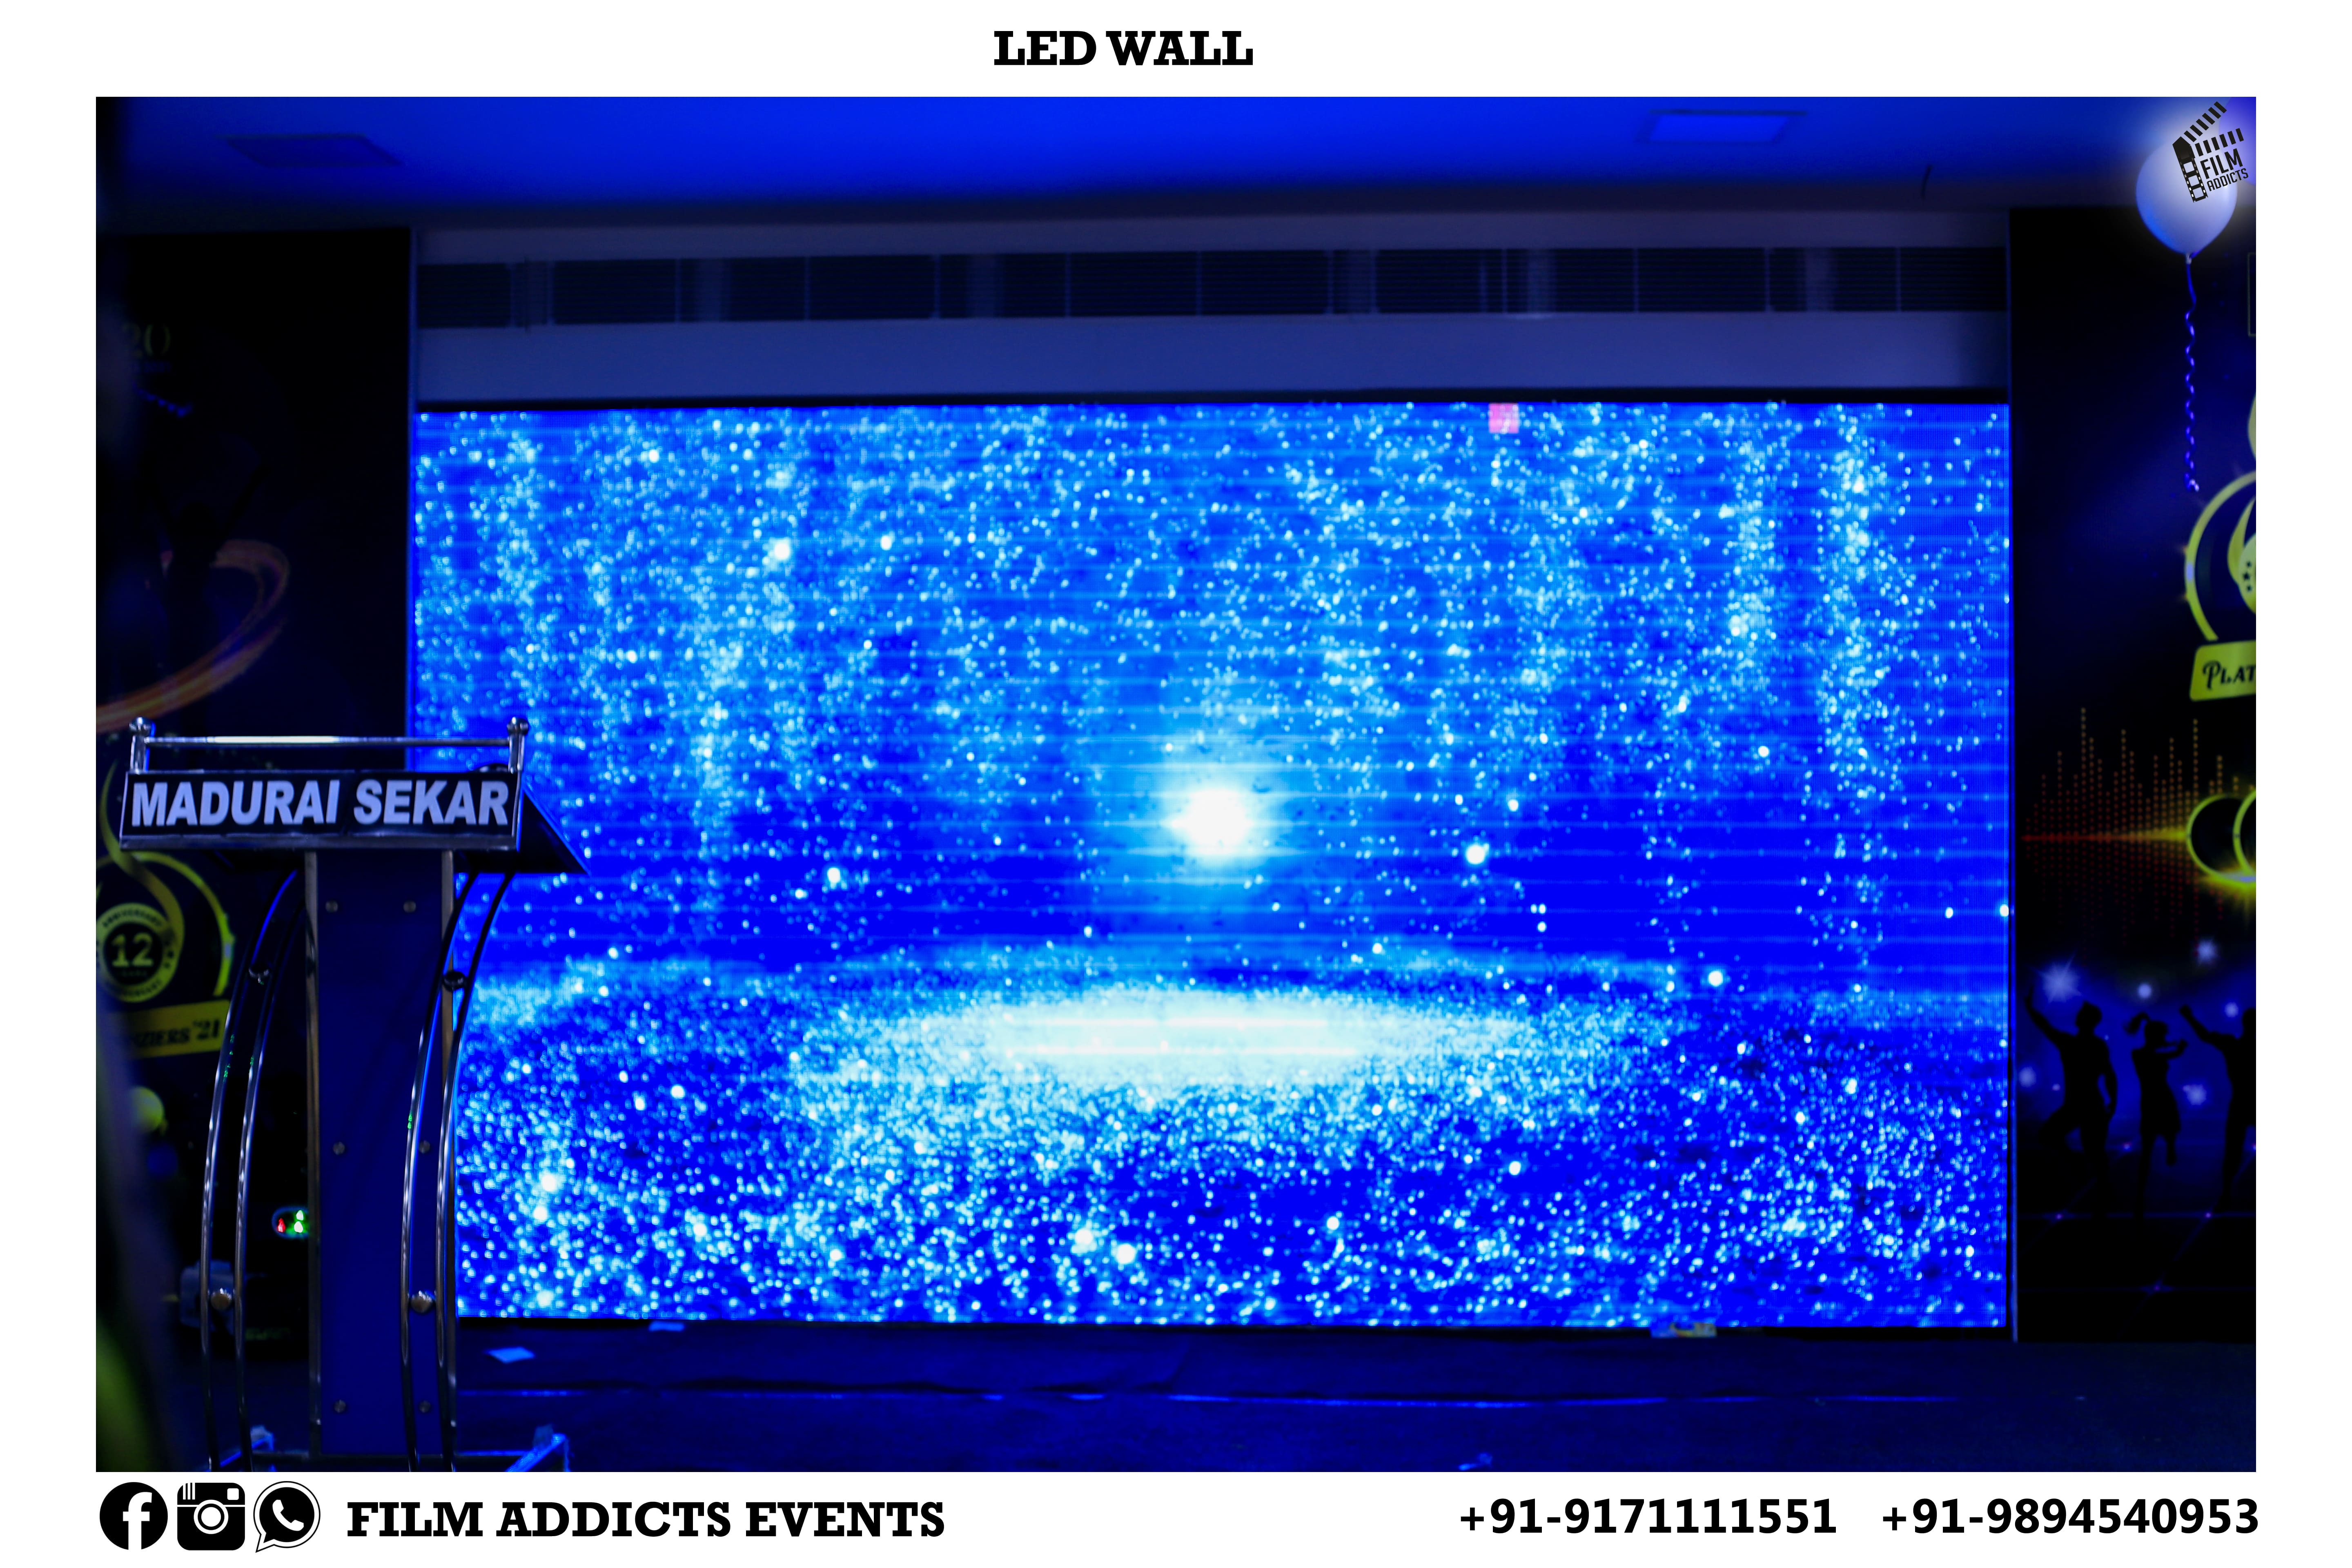 Best LED Video Wall Rentals in Sivagangai, Best LED Wall Services In Sivagangai ,Best LED Wall Rental Services In Sivagangai, Best Budget LED Wall Rental  Services in Sivagangai, Best Wedding LED Wall Rentals In Sivagangai, Best clarity in led wall rentals in Sivagangai, Best cost-effective display rentals in Sivagangai, Best crisp, bright, high resolution led video services in Sivagangai, Best led wall rental services in Sivagangai, Best tailored lighting, vision and sound solutions led rentals in Sivagangai, Best outstanding new LED panels rental Service in Sivagangai, Best Indoor and Outdoor LED panels rental Service in Sivagangai, Best high resolution LED display rental Service in Sivagangai, Best Wedding LED wall rentals in Sivagangai, Best Grand wedding LED wall rentals in Sivagangai, Best LED wall rental Service in Sivagangai, Best LED Video Services in Sivagangai, Best Grand Wedding LED wall Renatls in Sivagangai, Best LED wall Rentals for Grand Occasions in Sivagangai, Best Wedding LED Video Services in Sivagangai, Best Wedding LED video wall Rental Services in Sivagangai, Best LED Video Wall Rentals for Grand Occassions in Sivagangai, Best LED Video Wall Rentals for events in Sivagangai, Best LED video Services for live events in Sivagangai, Best video wall rentals for Live events in Sivagangai, Best LED Video Wall Rentals for Live events in Sivagangai, Best LED Video Wall On Hire in Sivagangai, Best LED Video Wall Services in Sivagangai, Best LED Video Wall Service Systems in Sivagangai, Best LED Wall Washer Light Services in Sivagangai, Best LED Wall Light Services in Sivagangai, Best LED Wall Mount Bracket Services in Sivagangai.